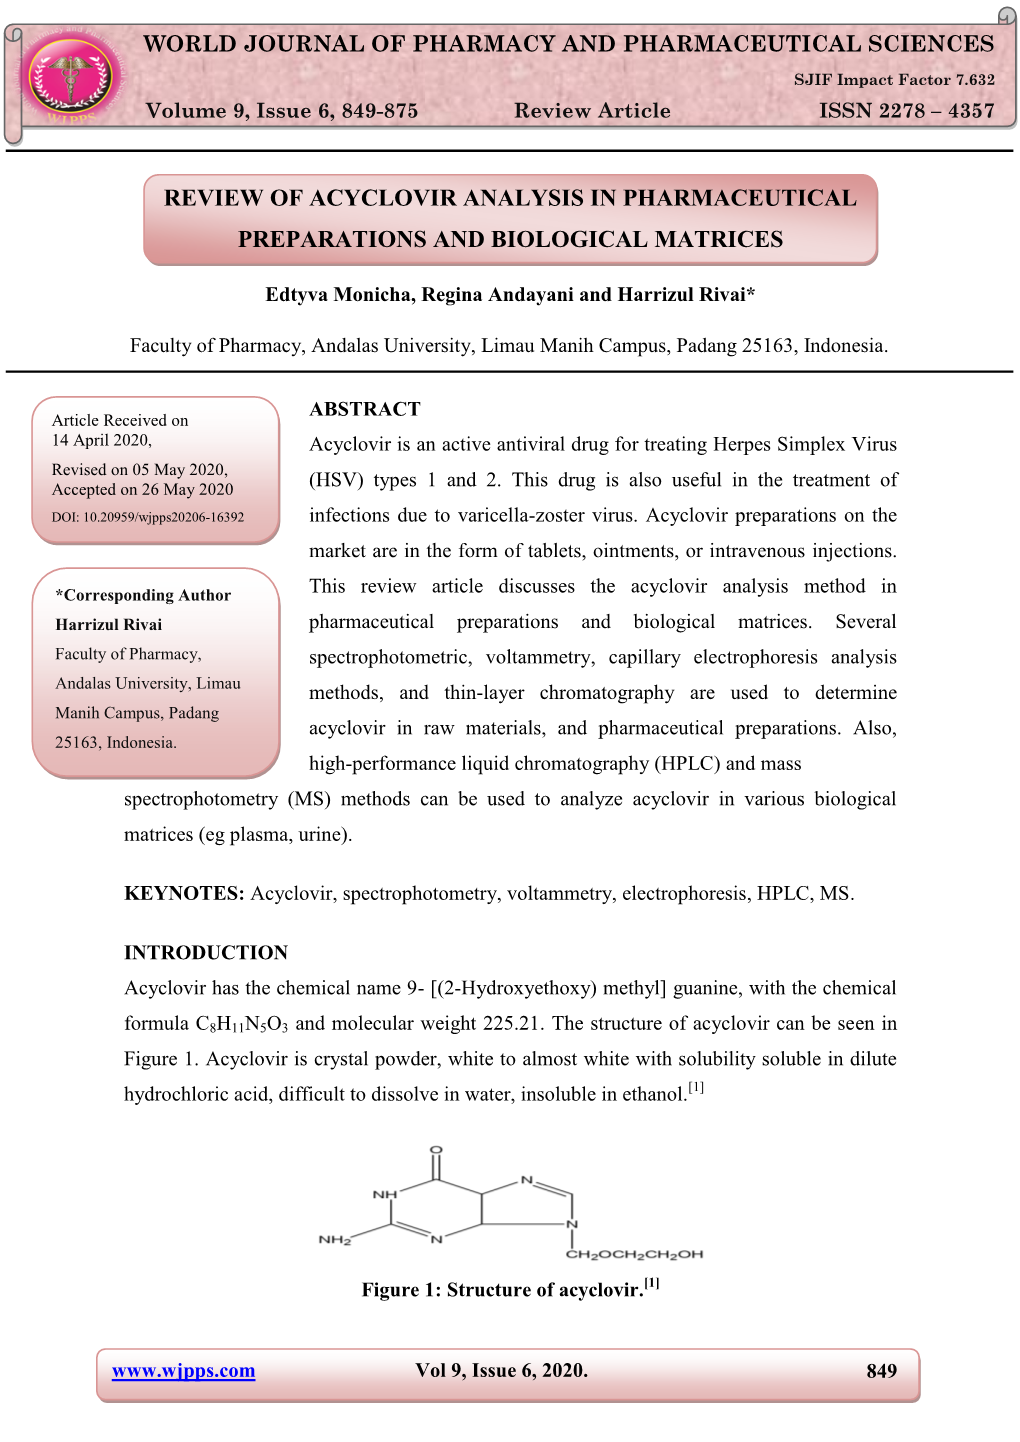 Review of Acyclovir Analysis in Pharmaceutical Preparations and Biological Matrices